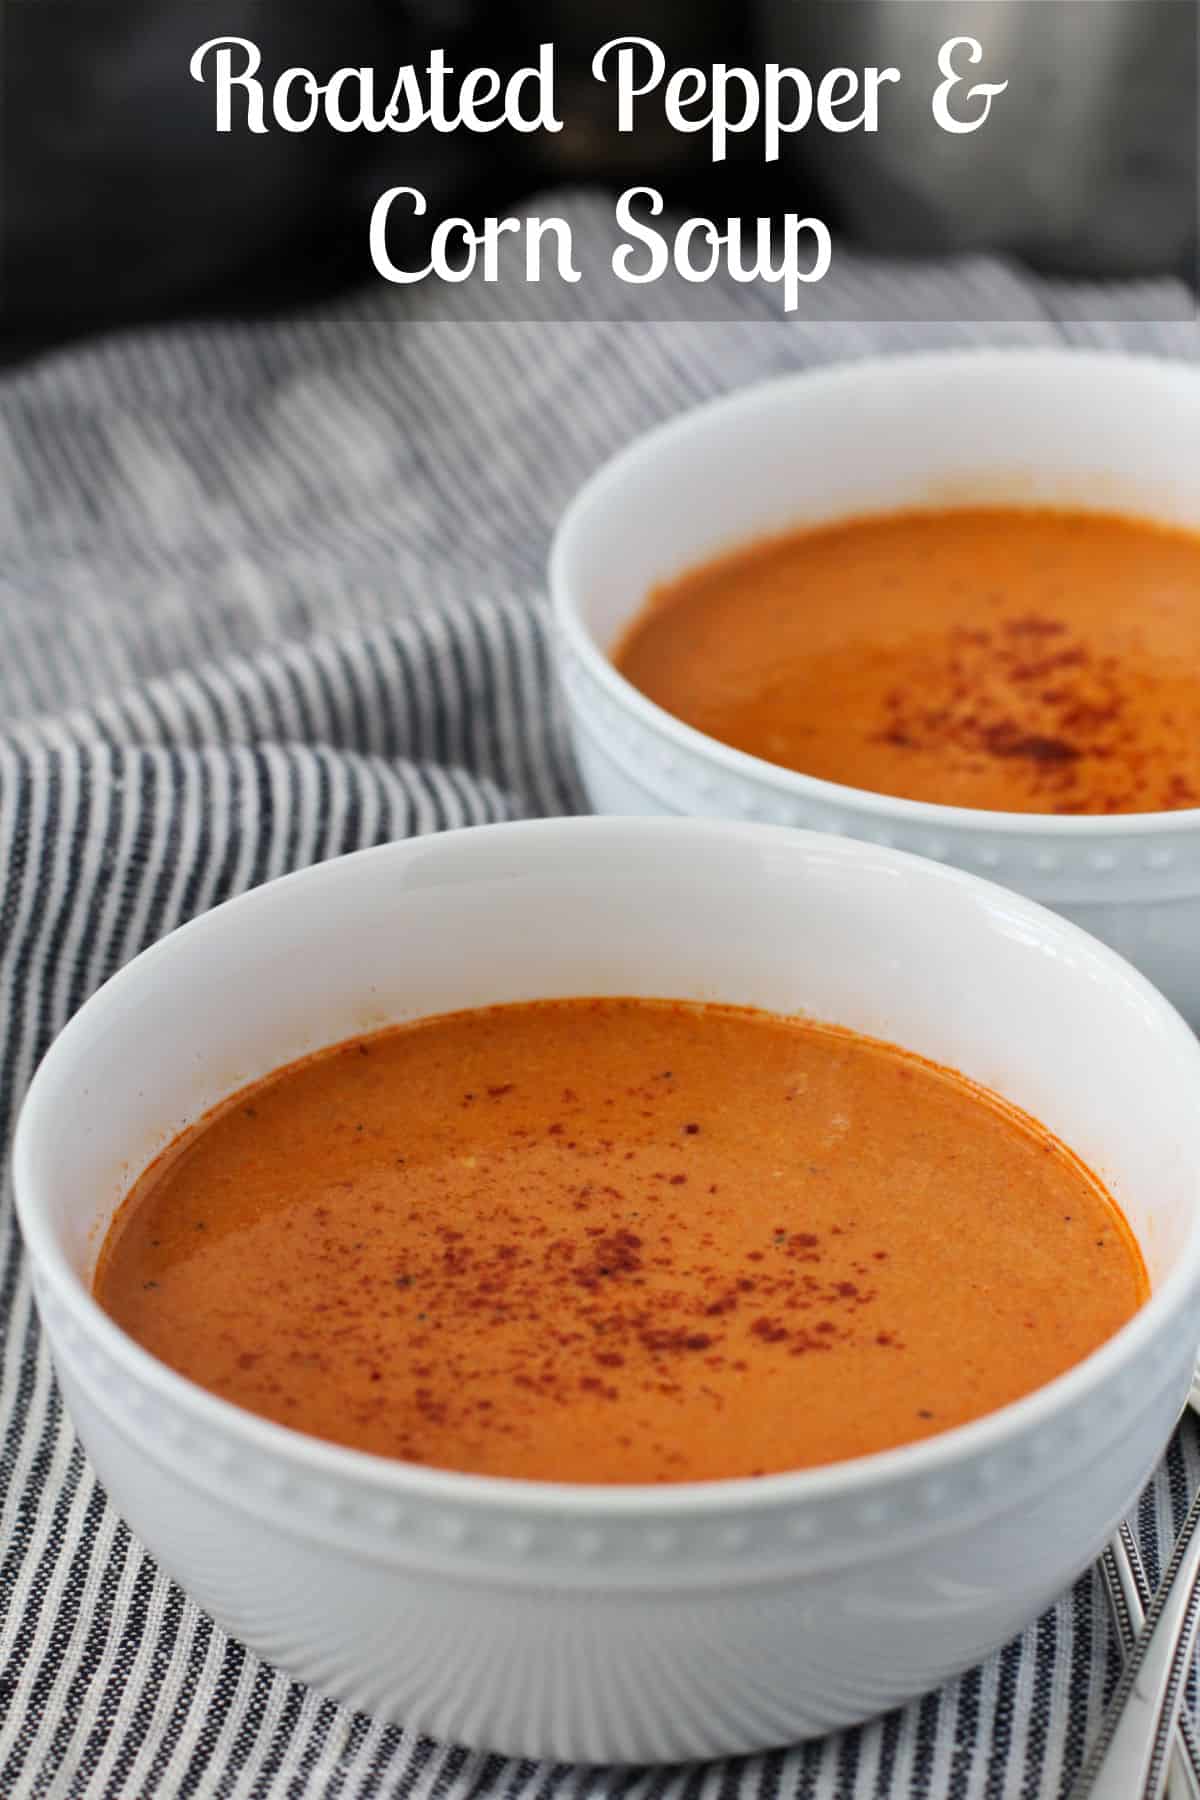 Corn and red pepper soup in bowls.